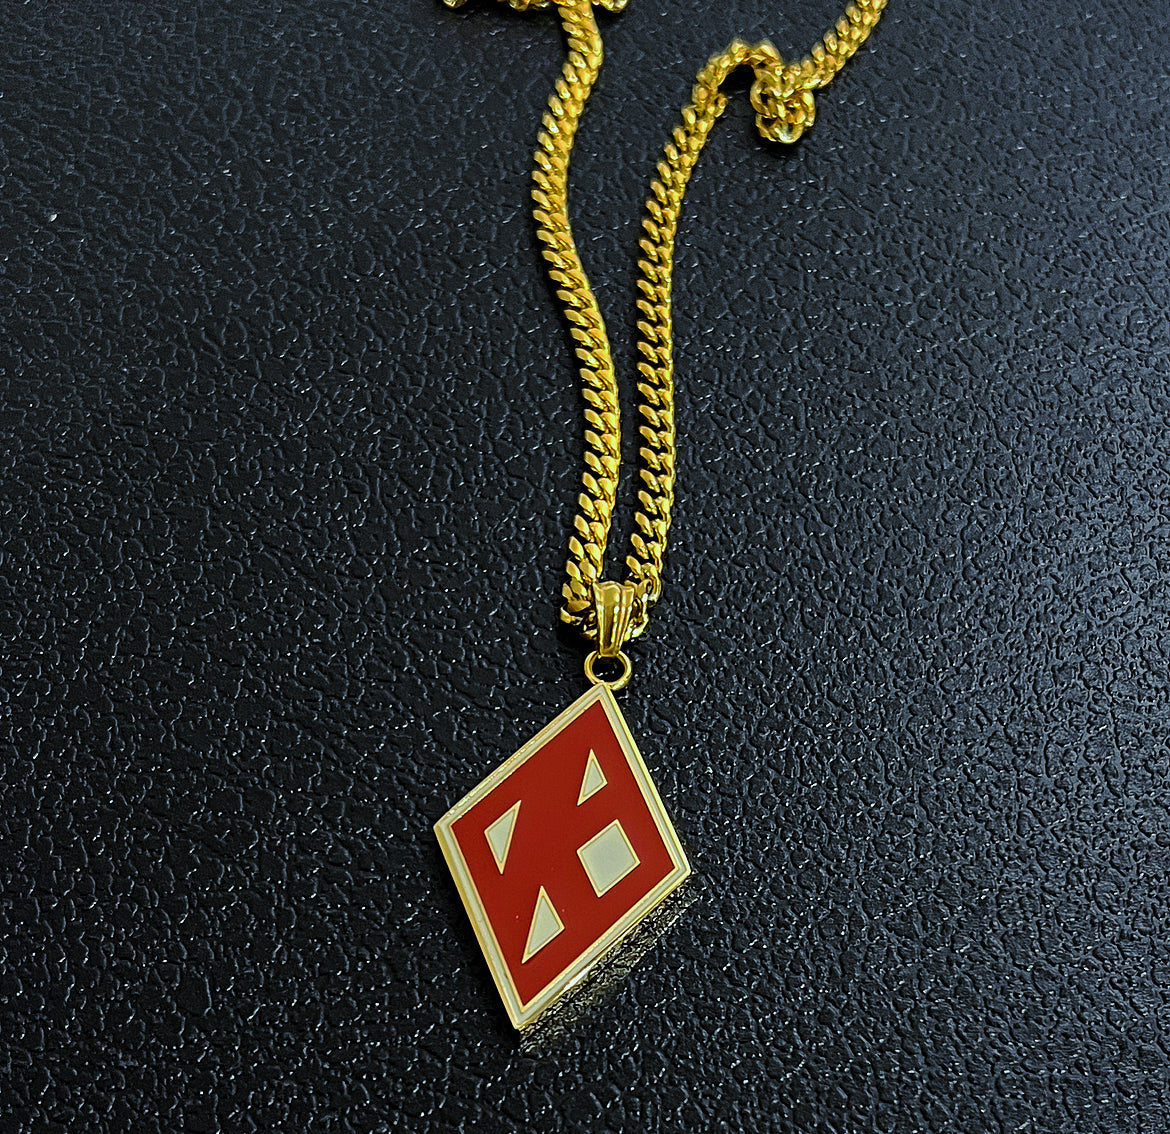 Ideal for members of the Kappa Alpha Psi fraternity, this necklace is a must-have item for anyone looking to show off their Greek Kappa pride. Whether you're looking to add to your collection of fraternal organization memorabilia or simply looking for a stylish accessory, this Crimson and Cream Necklace is the perfect choice.